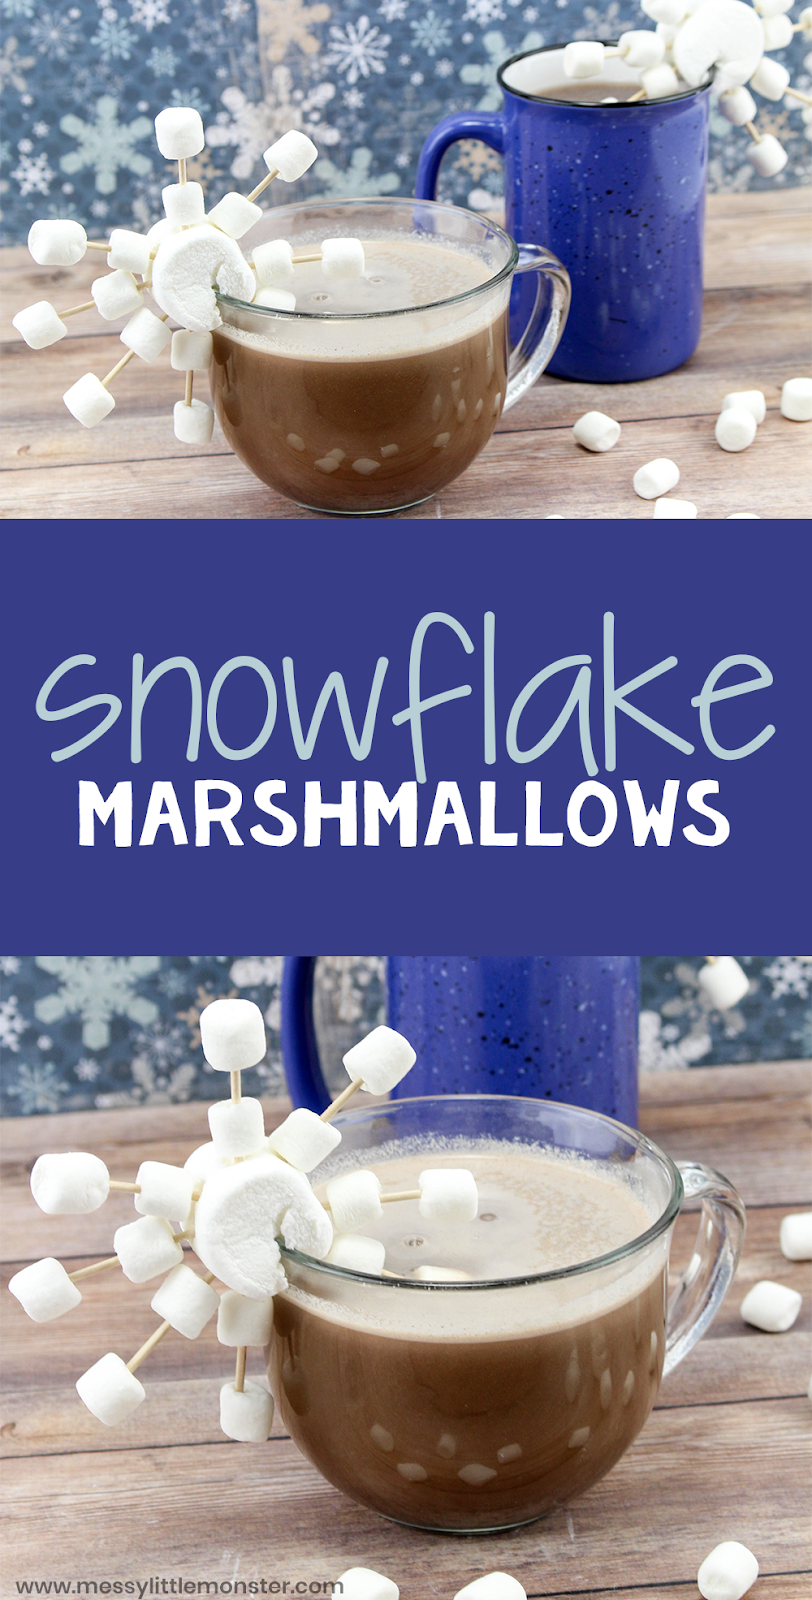 Snowflake marshmallows. Winter STEM activity for kids. Fine motor skills activity for toddlers and preschoolers.